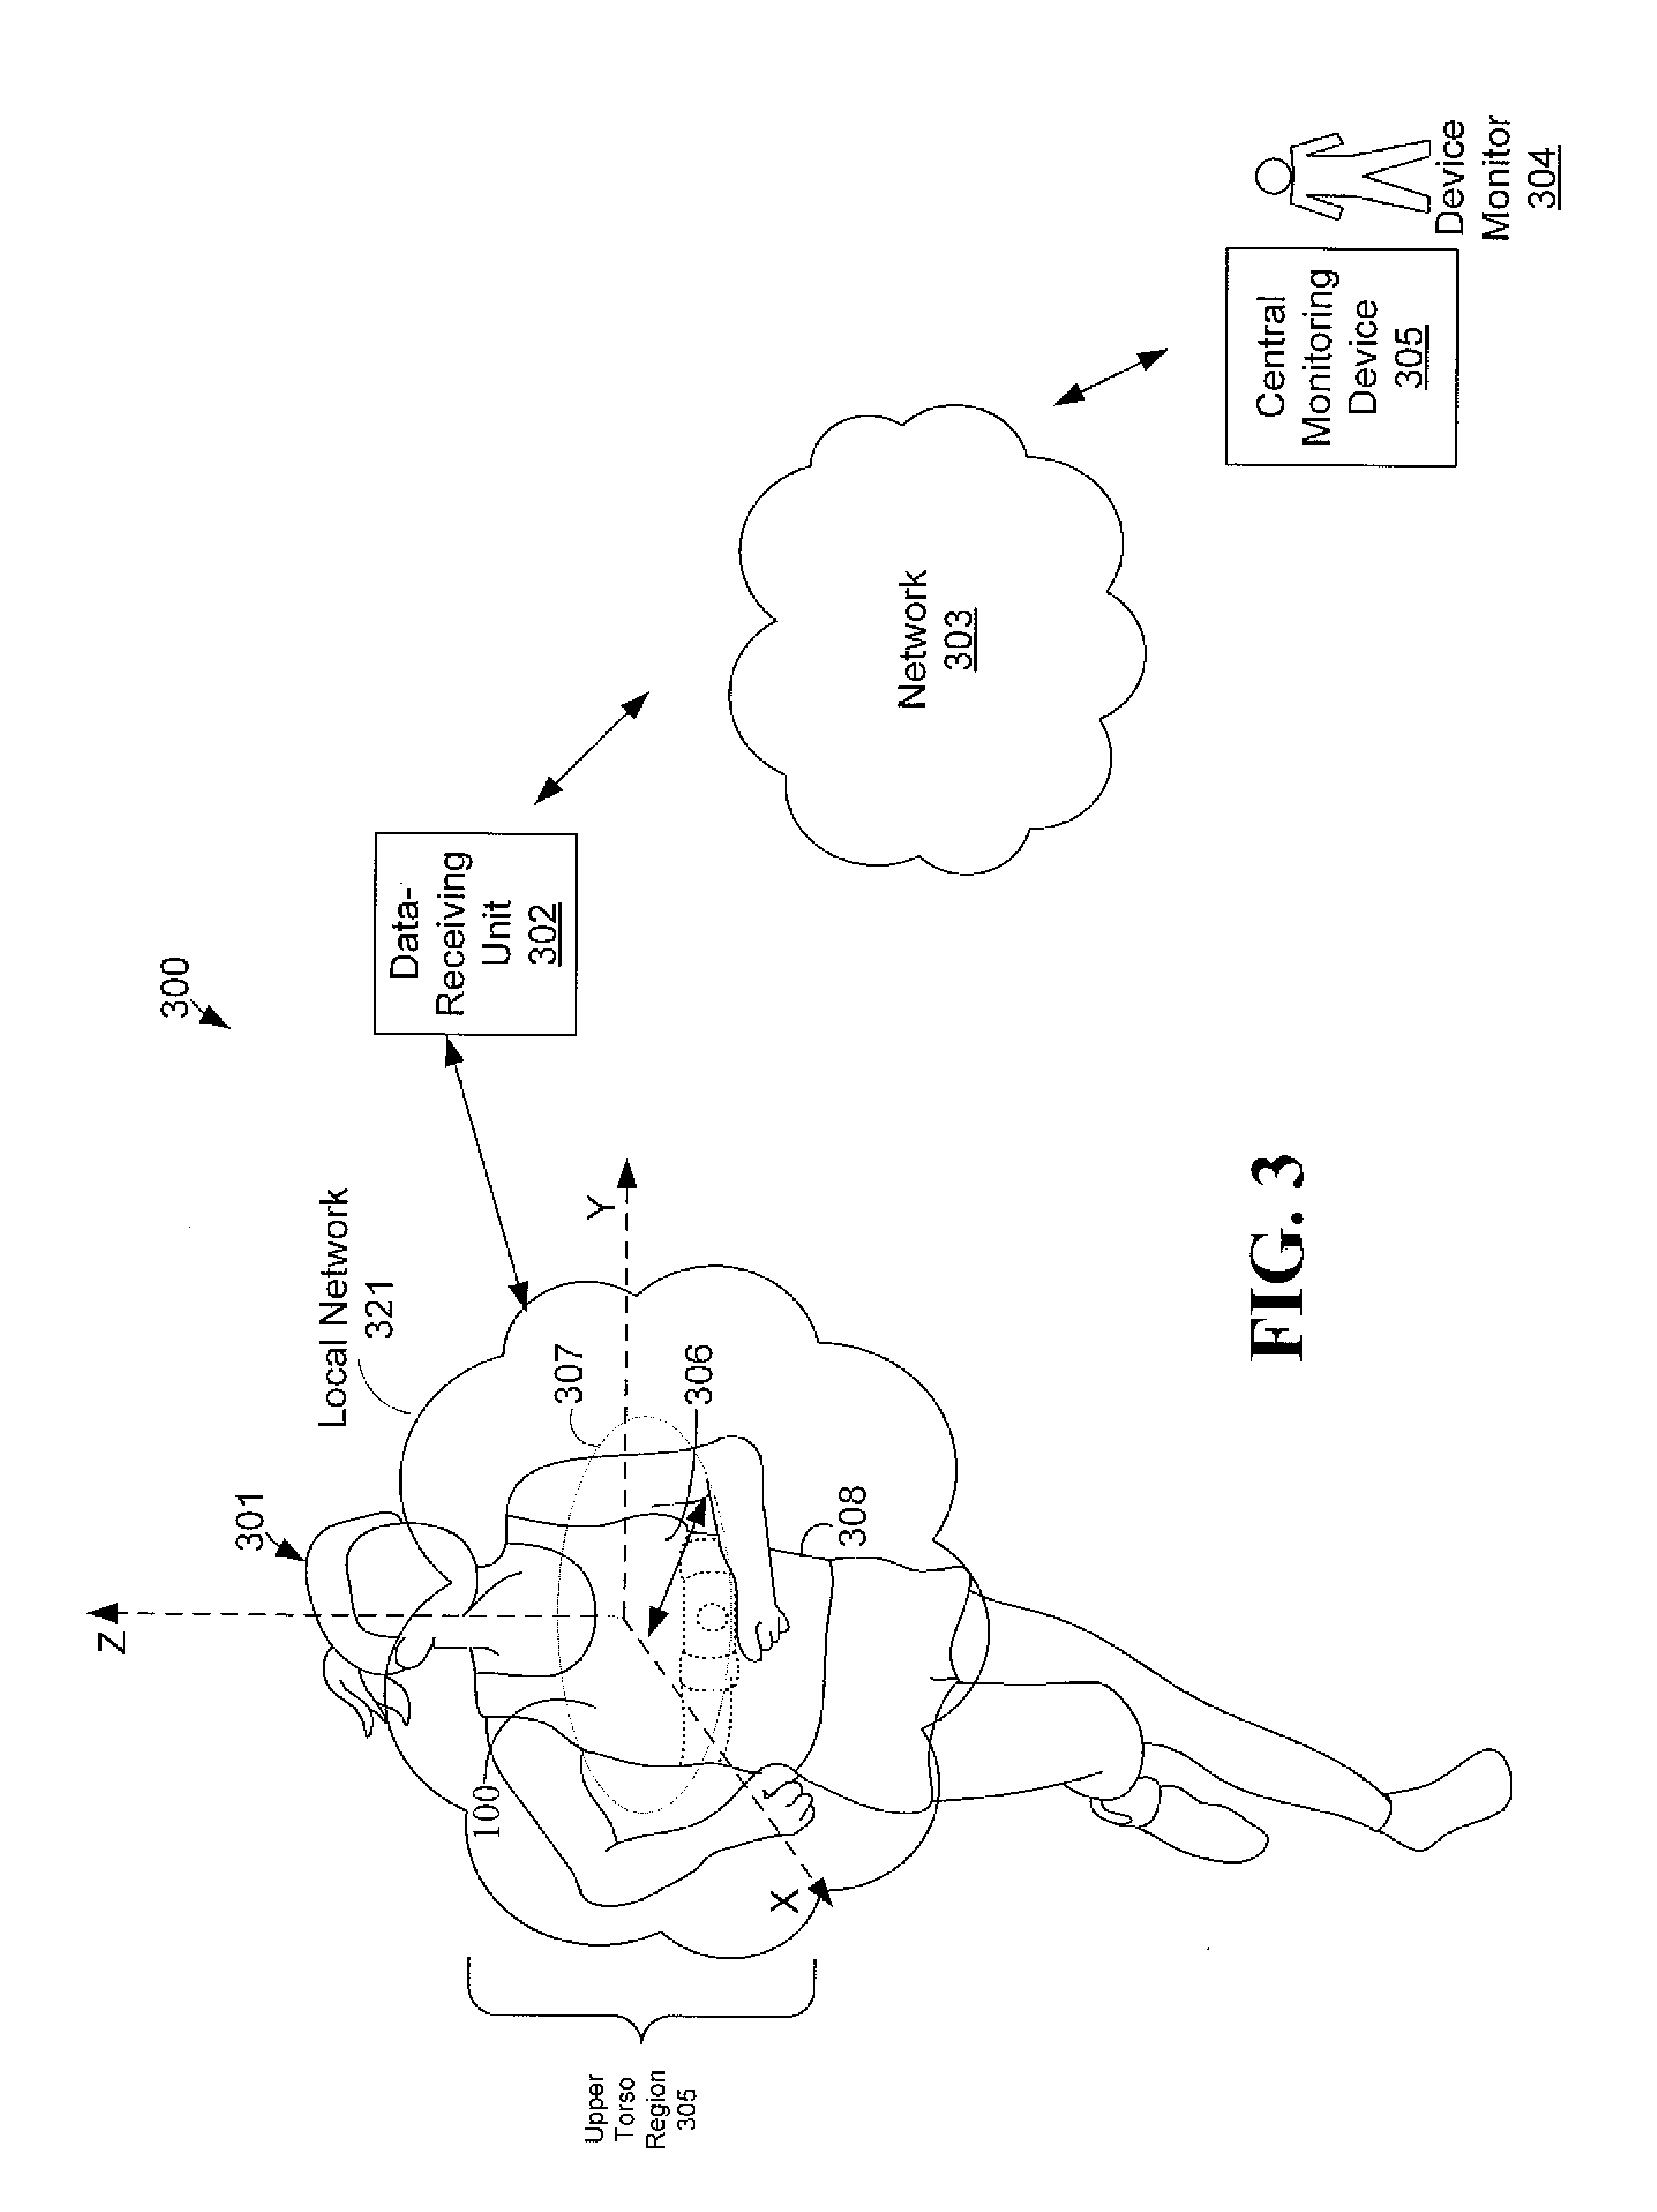 Wearable Health Monitoring Device and Methods for Step Detection